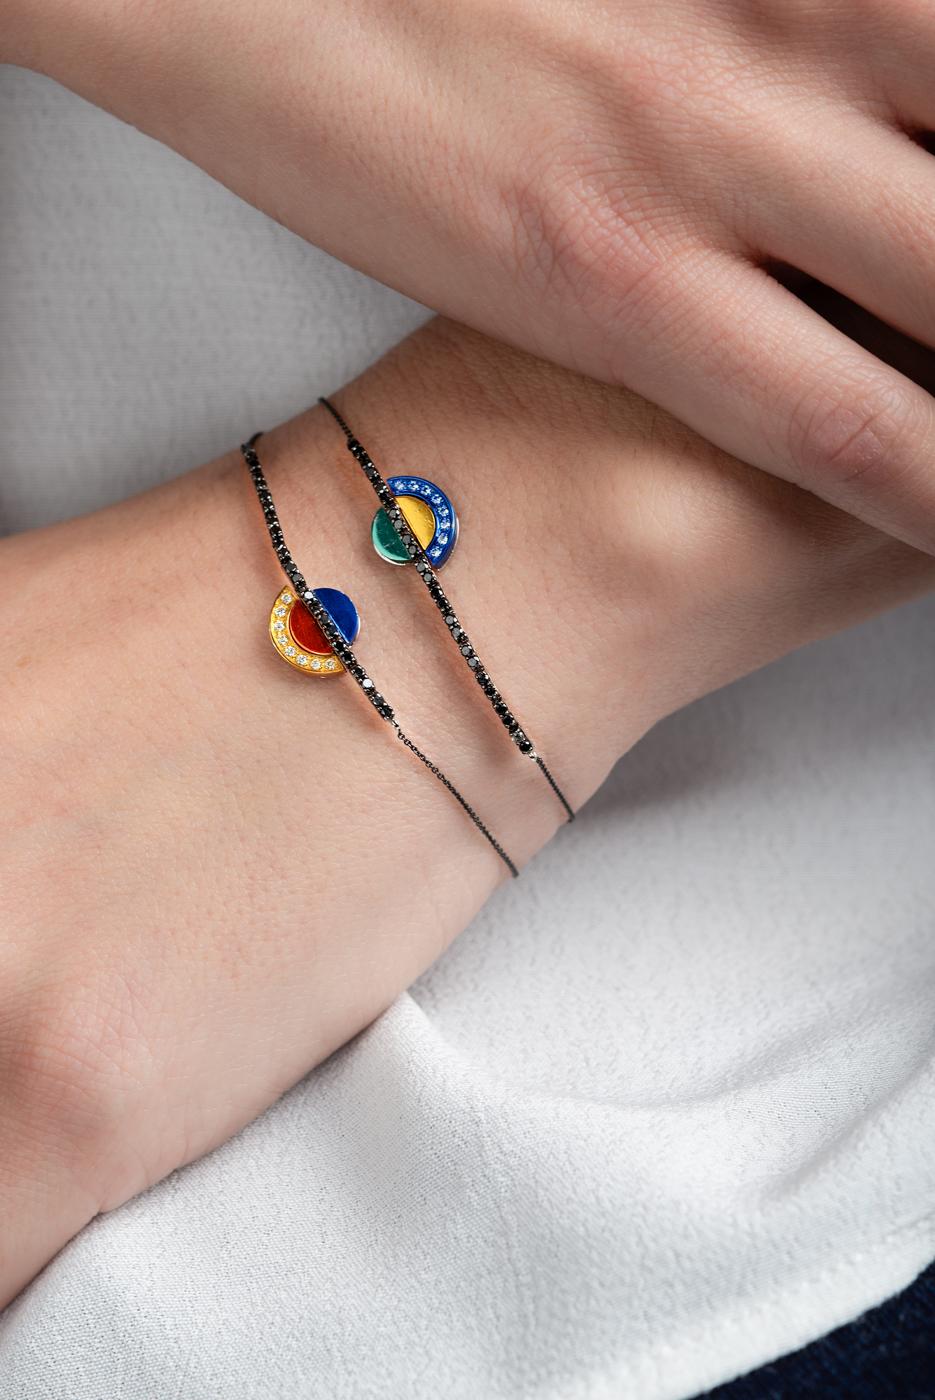 Nikos Koulis bracelet from ‘Acrobat’ collection, which is about artistic freedom along certain schemes. Influenced by artists such as Wassily Kandinsky, who expressed his inner self through geometrical schemes and liberated his forms and colors,